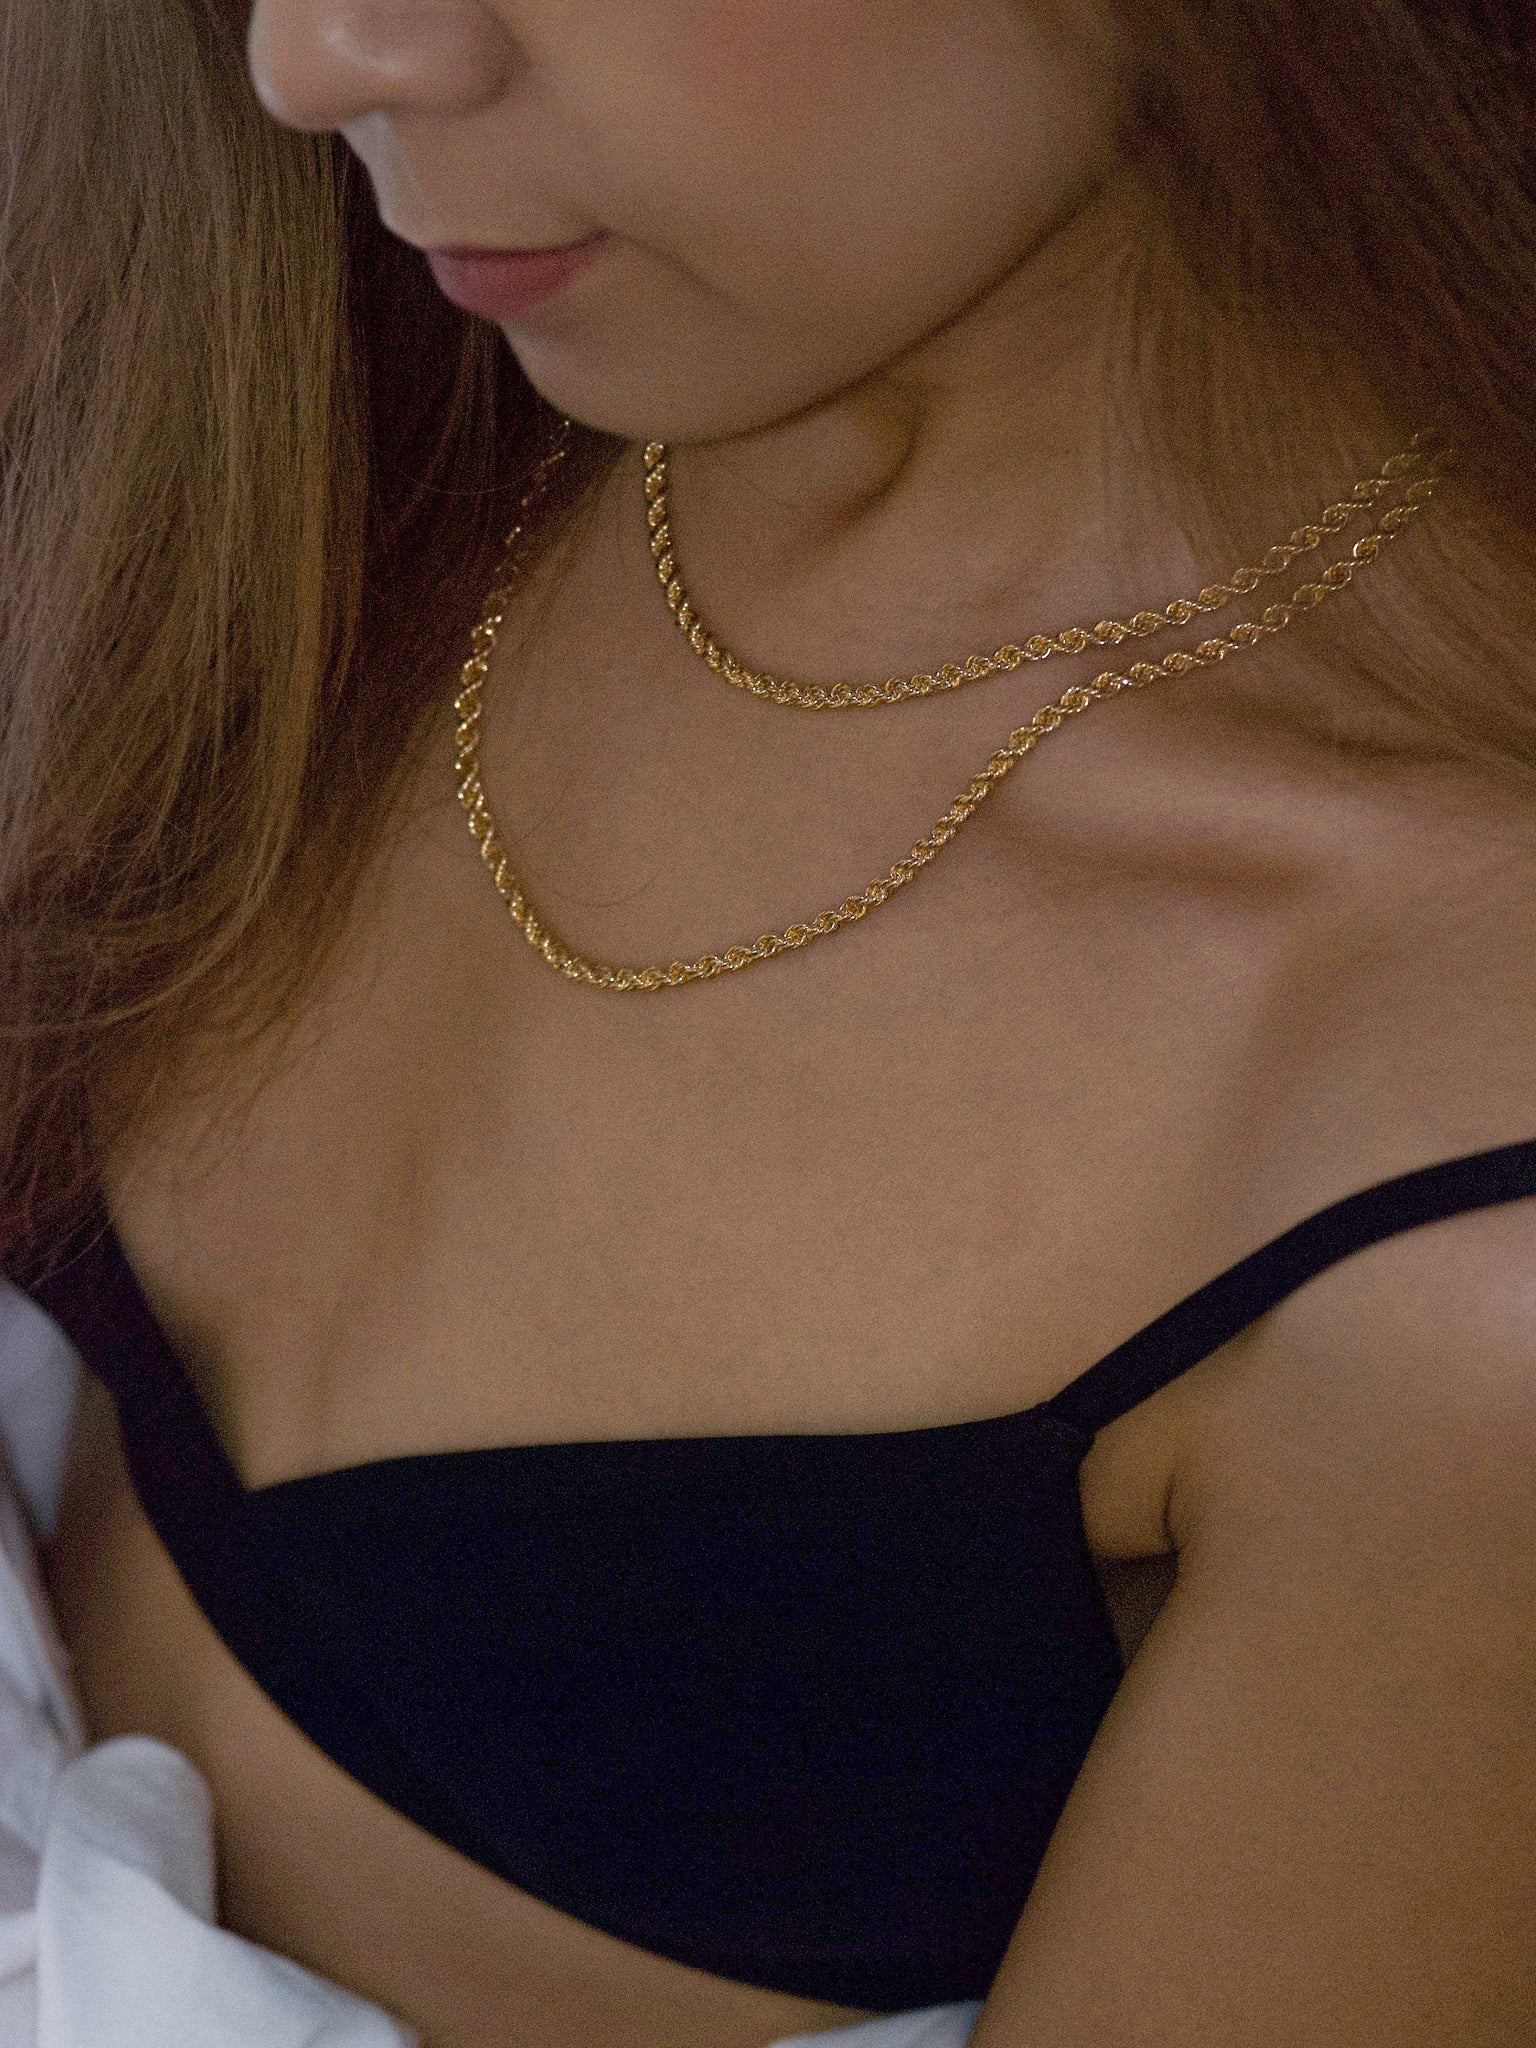 Your favorite rope necklace is here. A chain for statement markers, available in two lengths born from our love of layering. It looks great alone or stacked with more pieces. Made in 18-karat Gold Filled to last long. Water and sweat resistance.